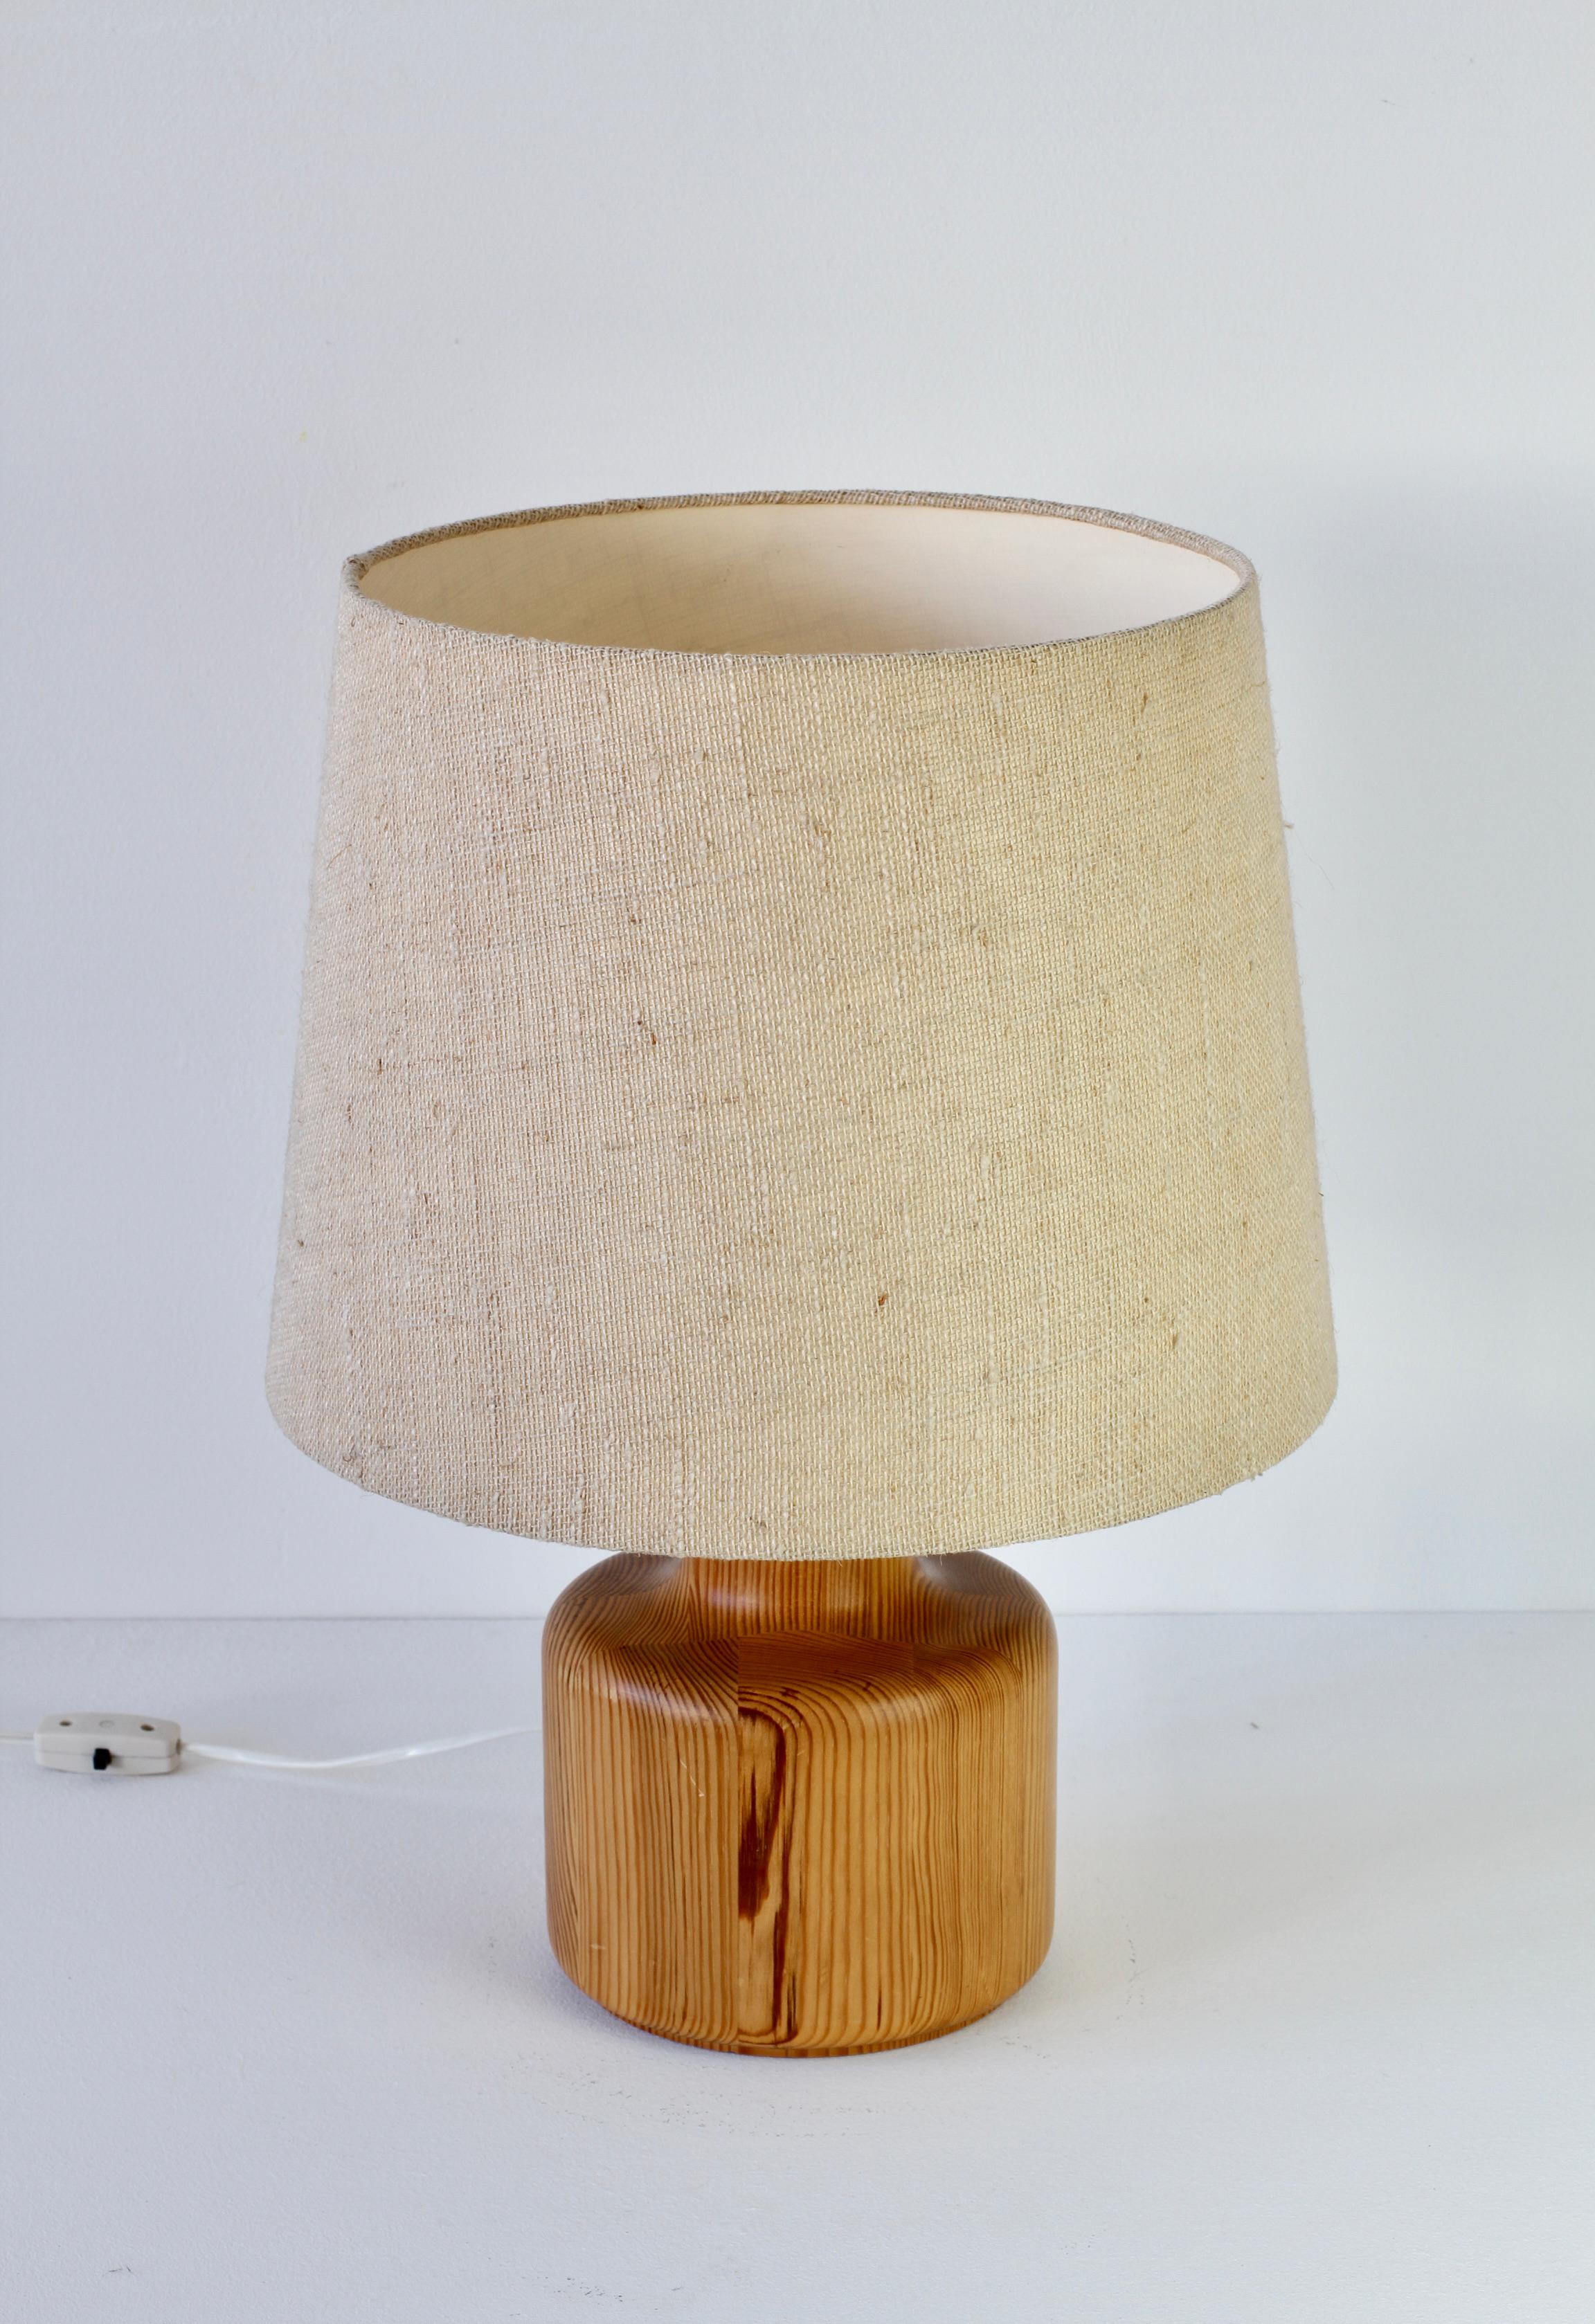 Large, Scandinavian (Swedish / Danish) style turned / lathed pinewood table lamp made by Swiss German company Bestform Freudenberg circa 1960s / 1970s. Beautiful natural materials crafted in to simple perfection perfect for any vintage mid-century